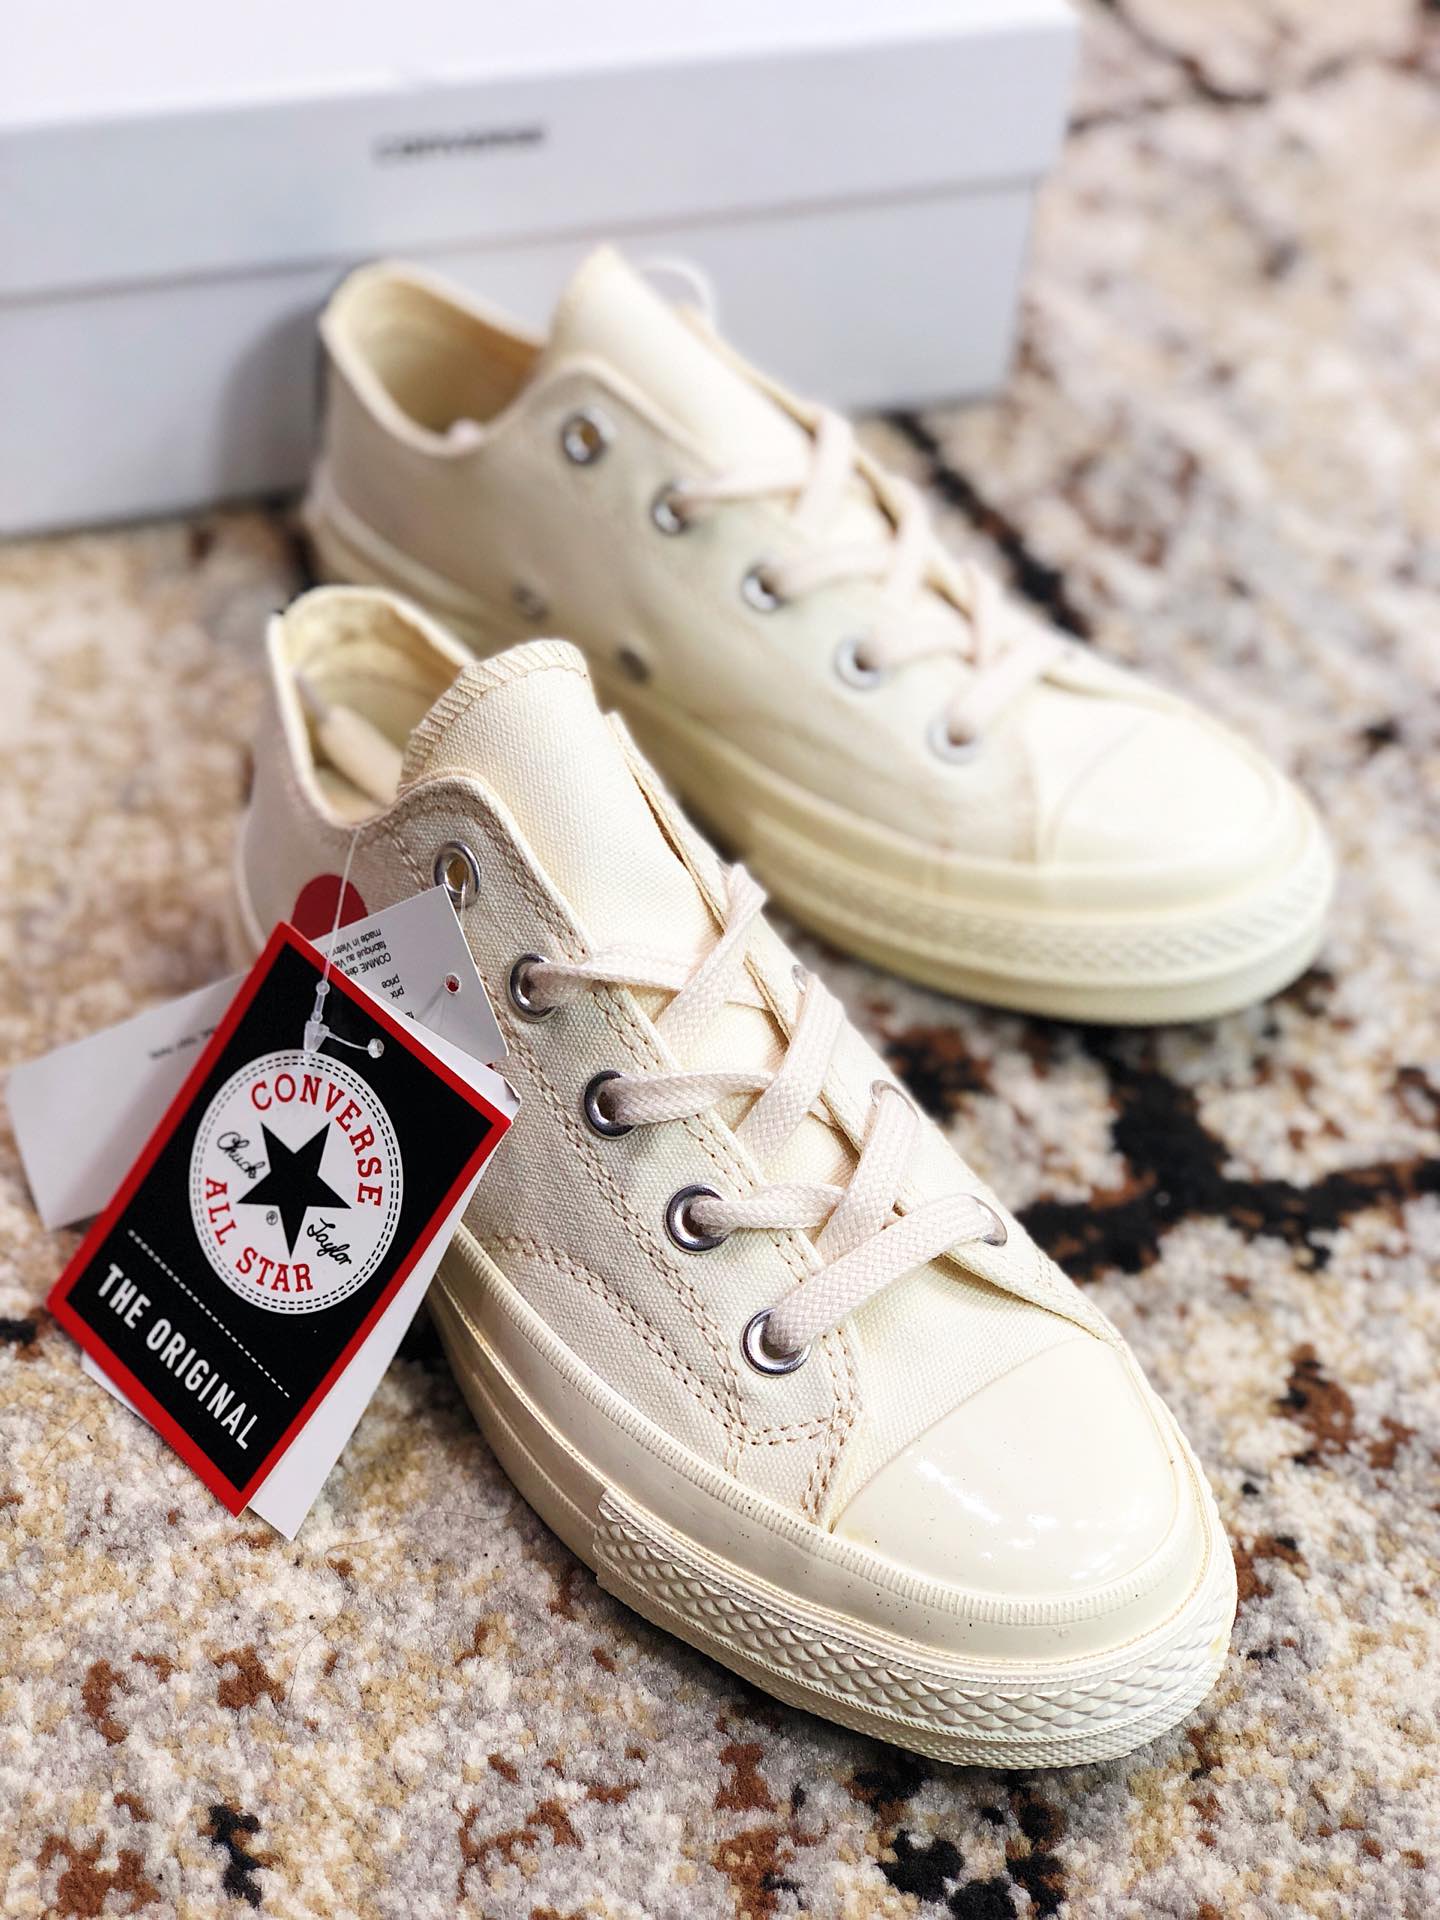 converse all star low leather light twine rose gold